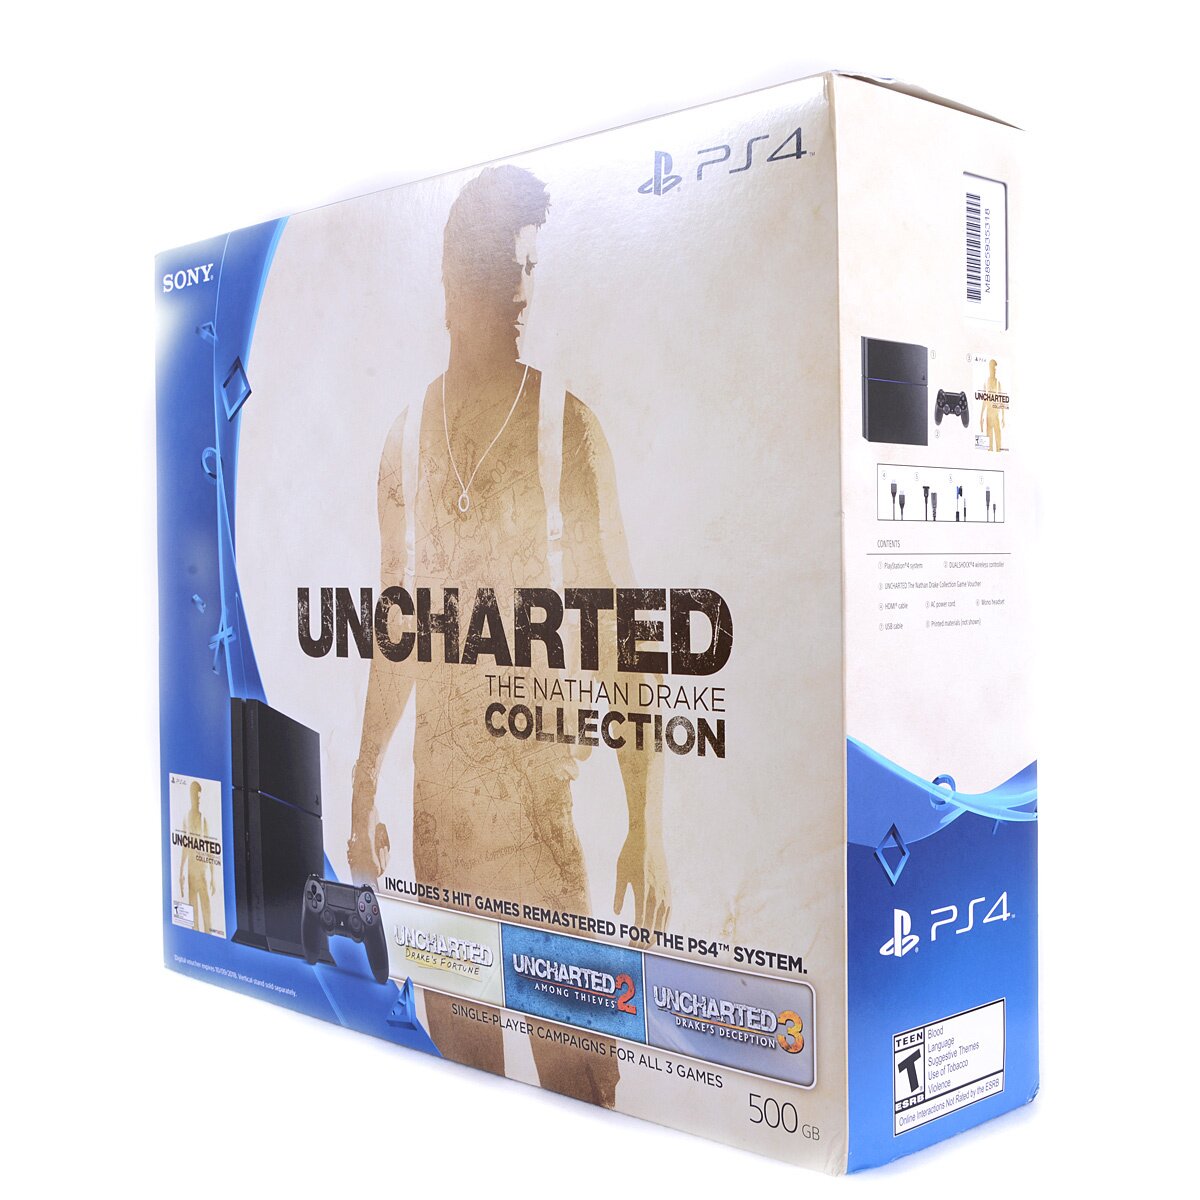 Uncharted: Collection - Sony PlayStation 4 for sale online